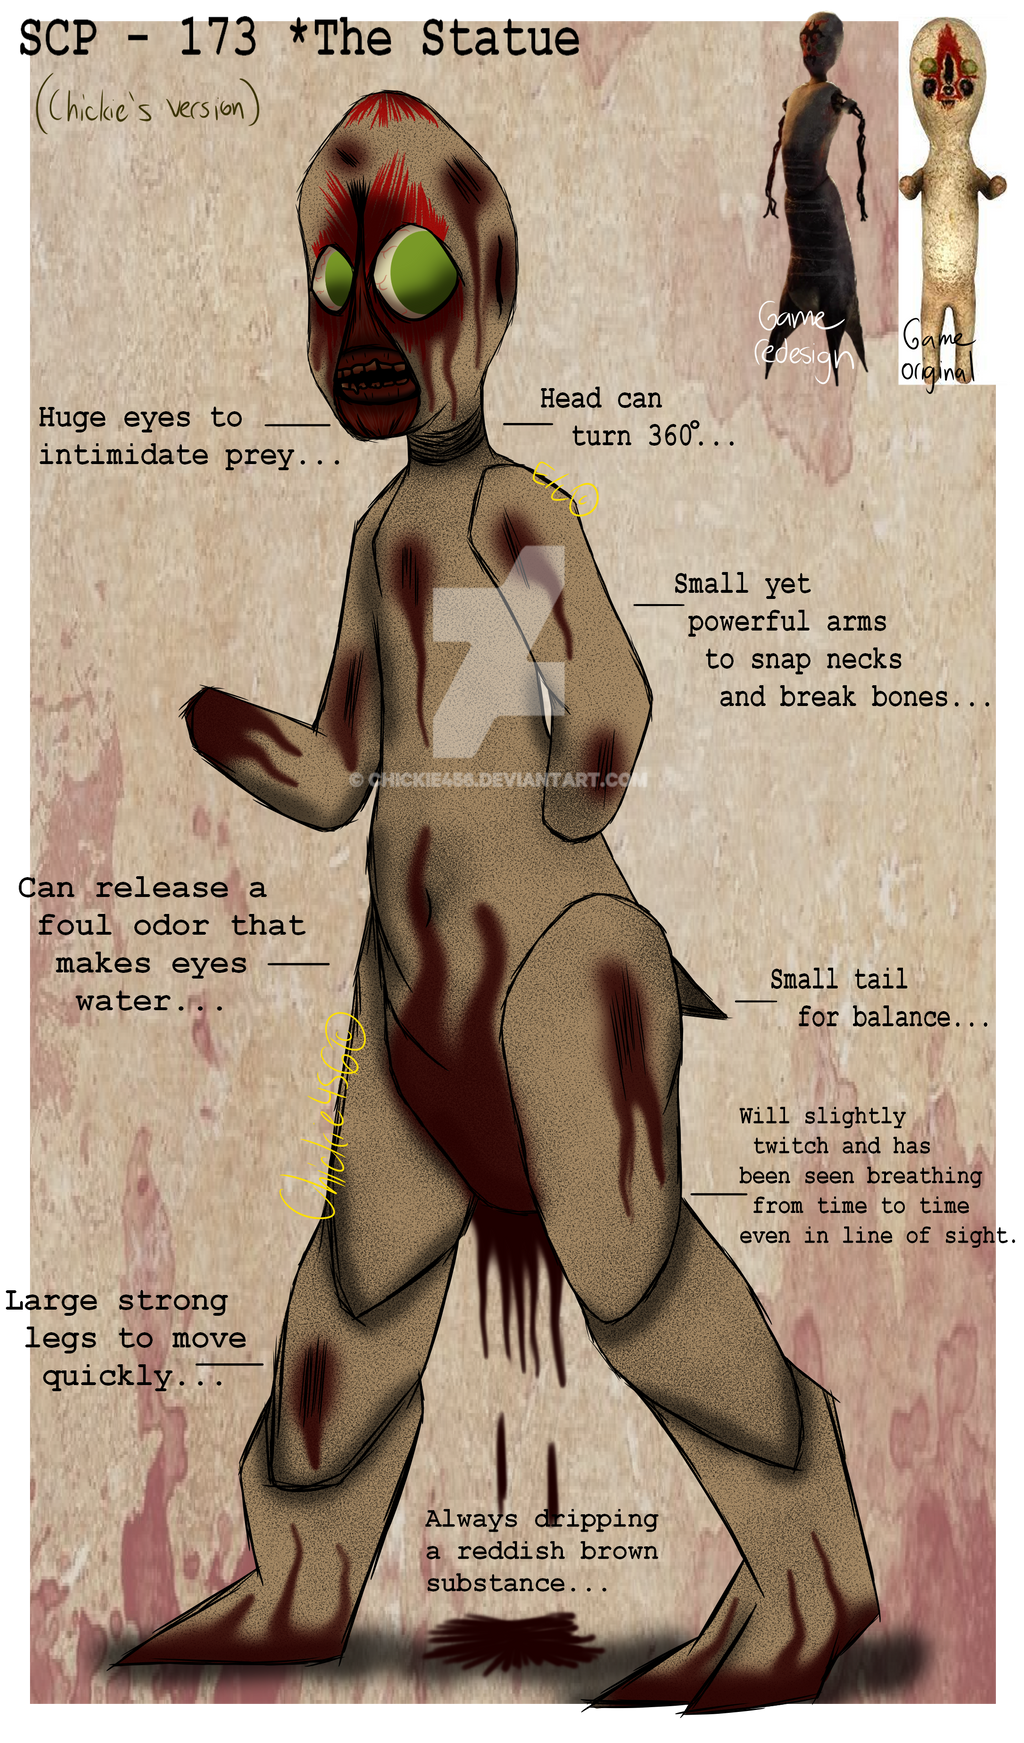 SCP-999, The Tickle Monster, SCP Humanized by Alloween on DeviantArt